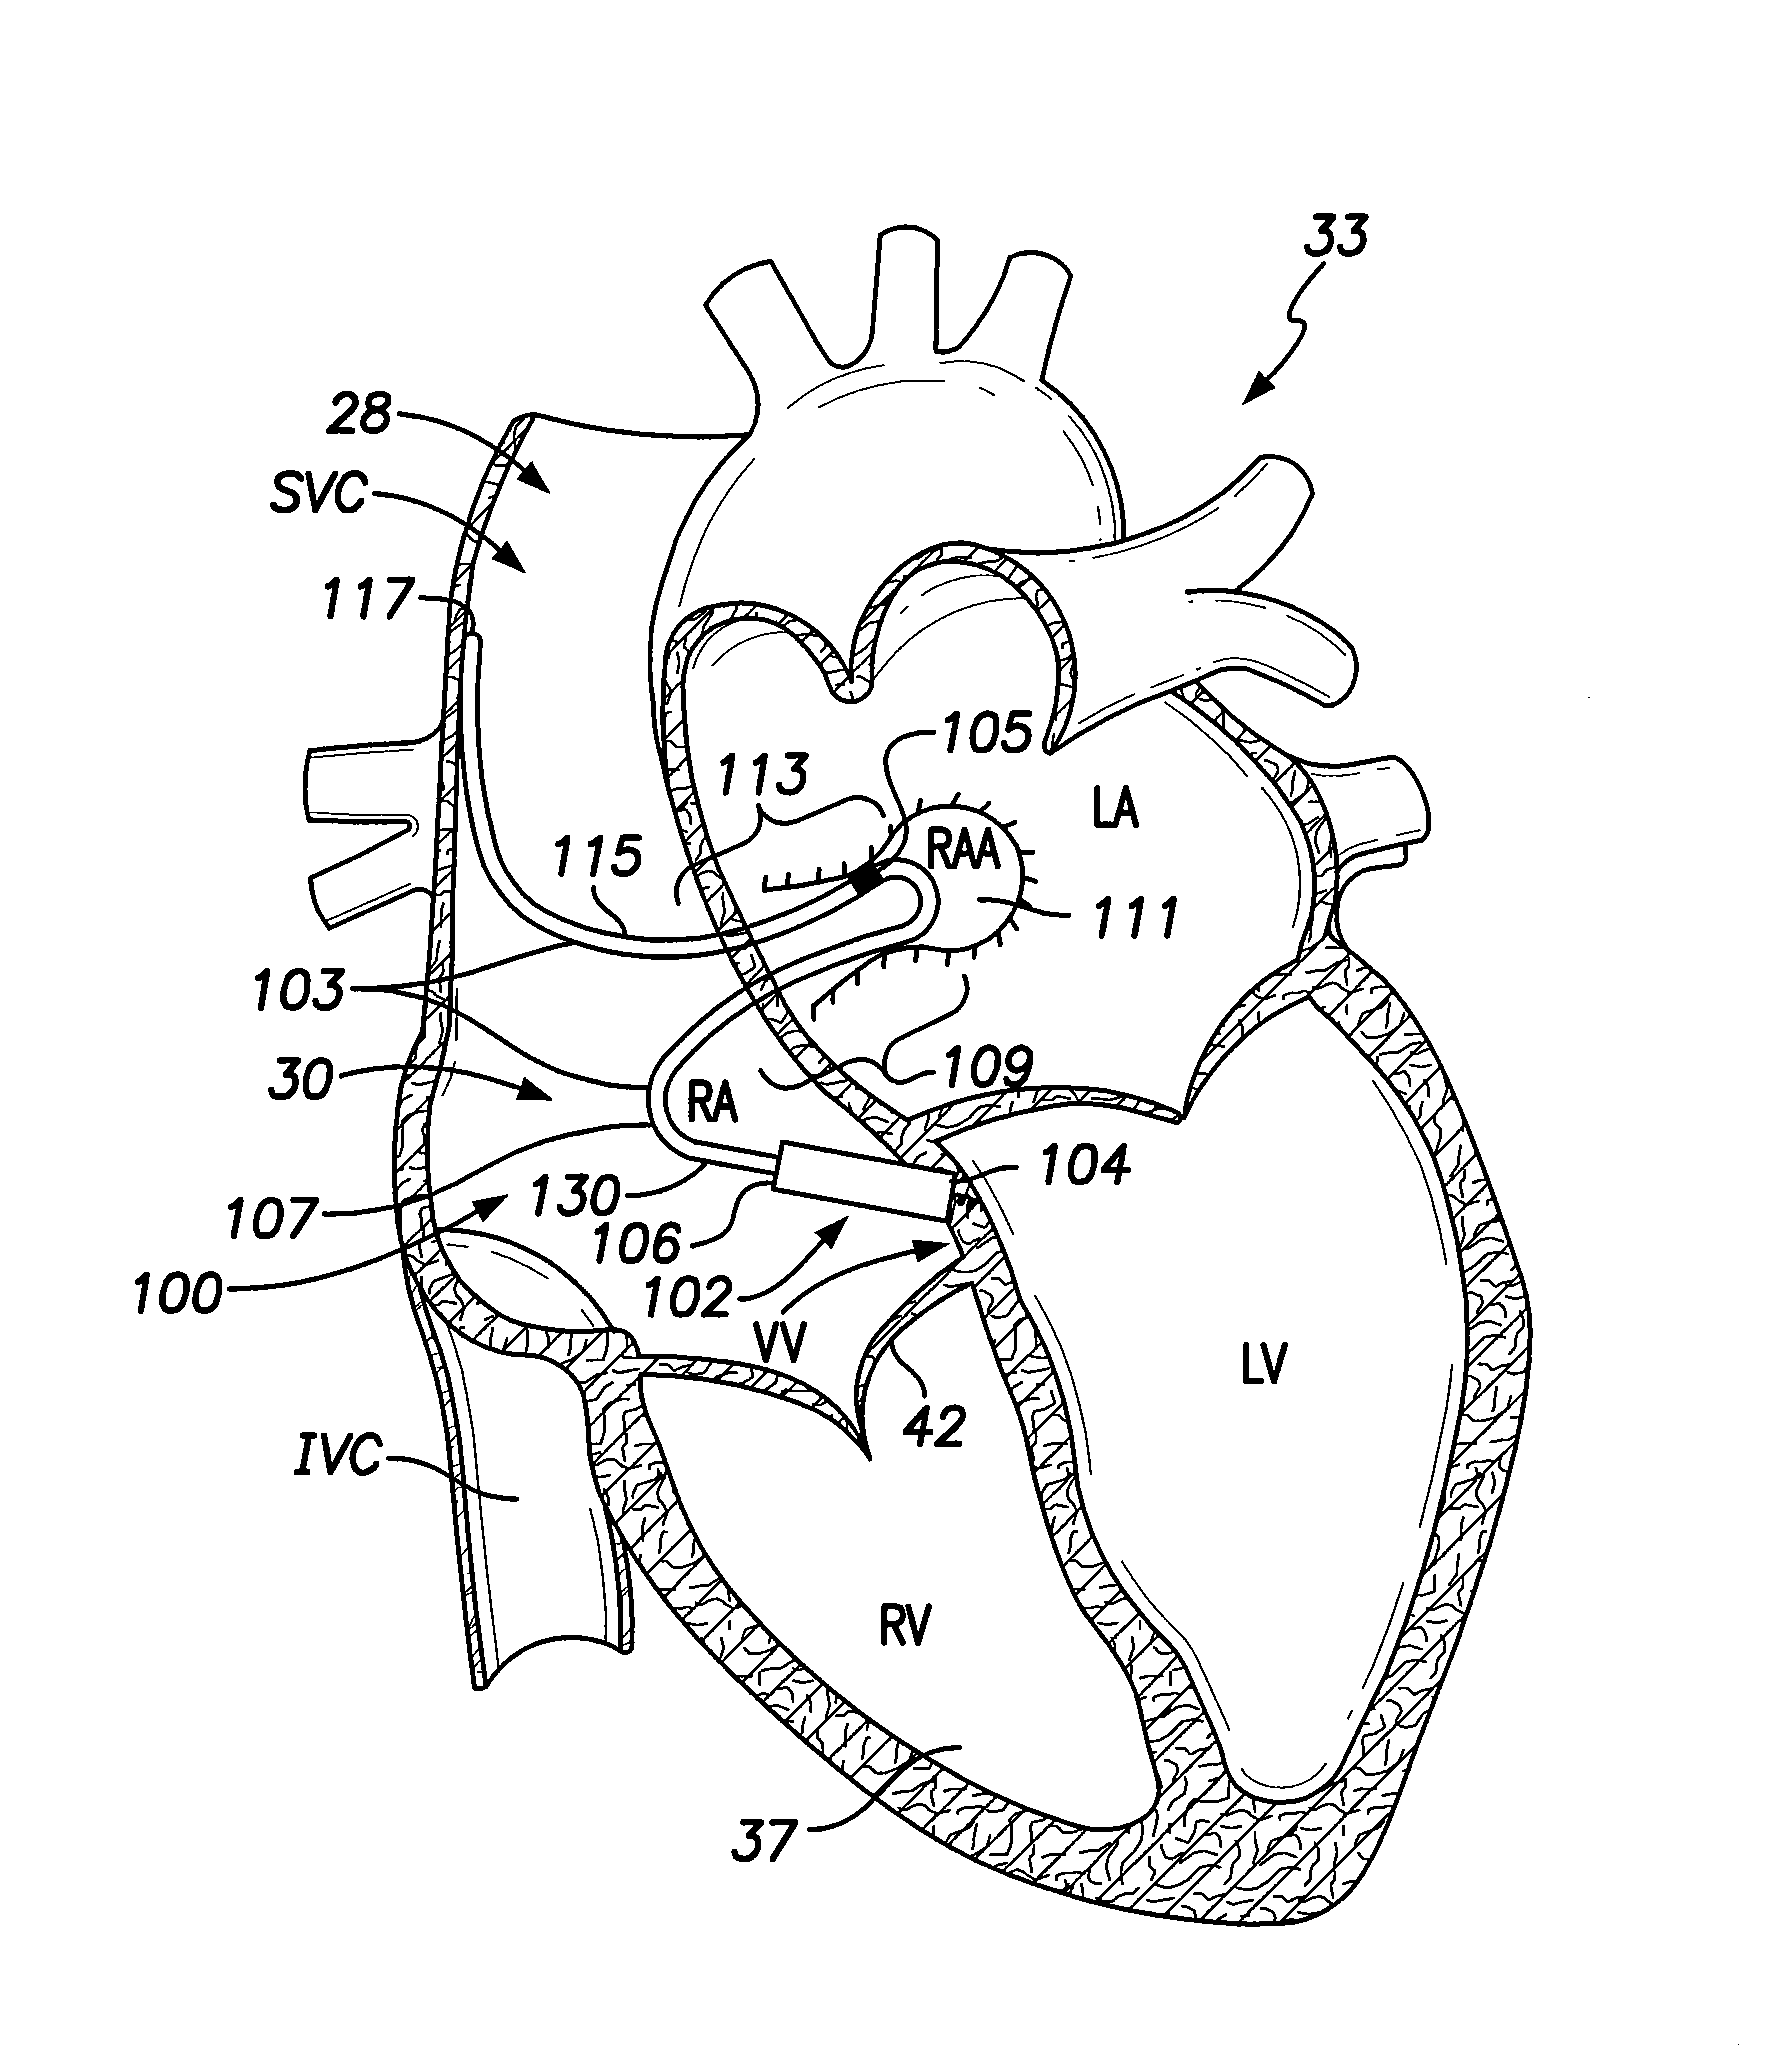 Leadless intra-cardiac medical device with reduced number of feed-thrus